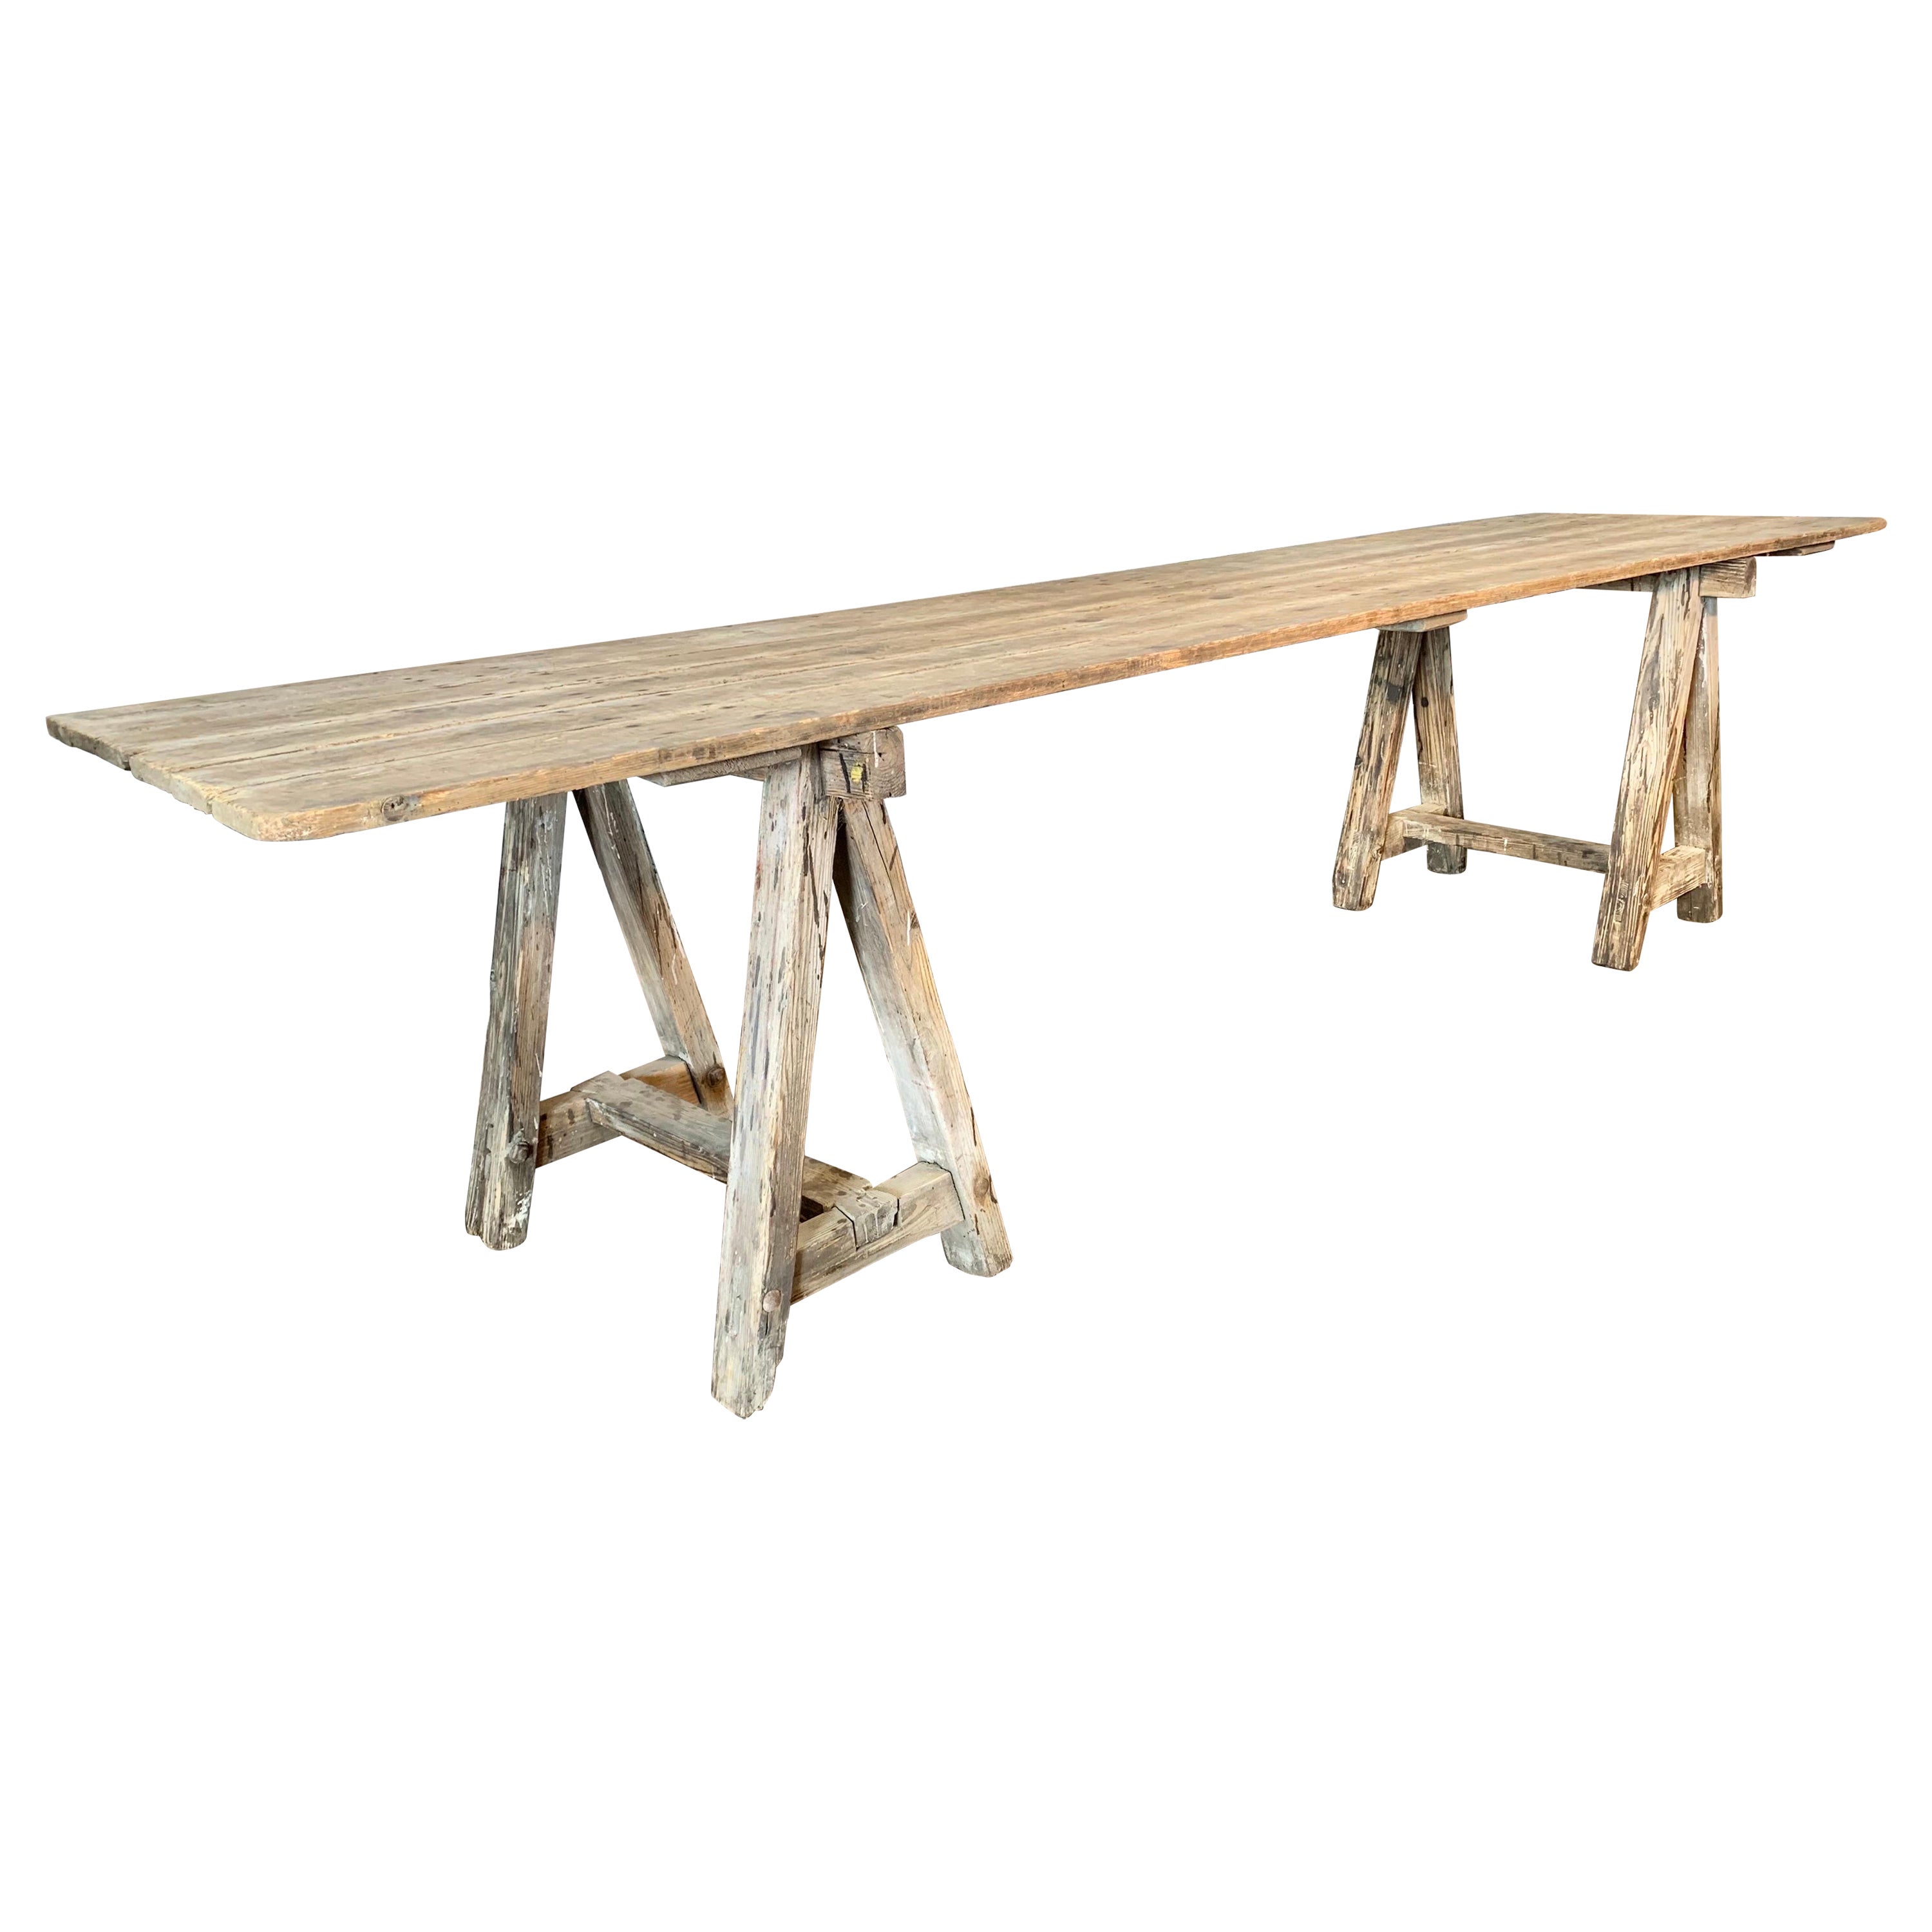 Early 20th Century French Pine Vineyard Harvest Table